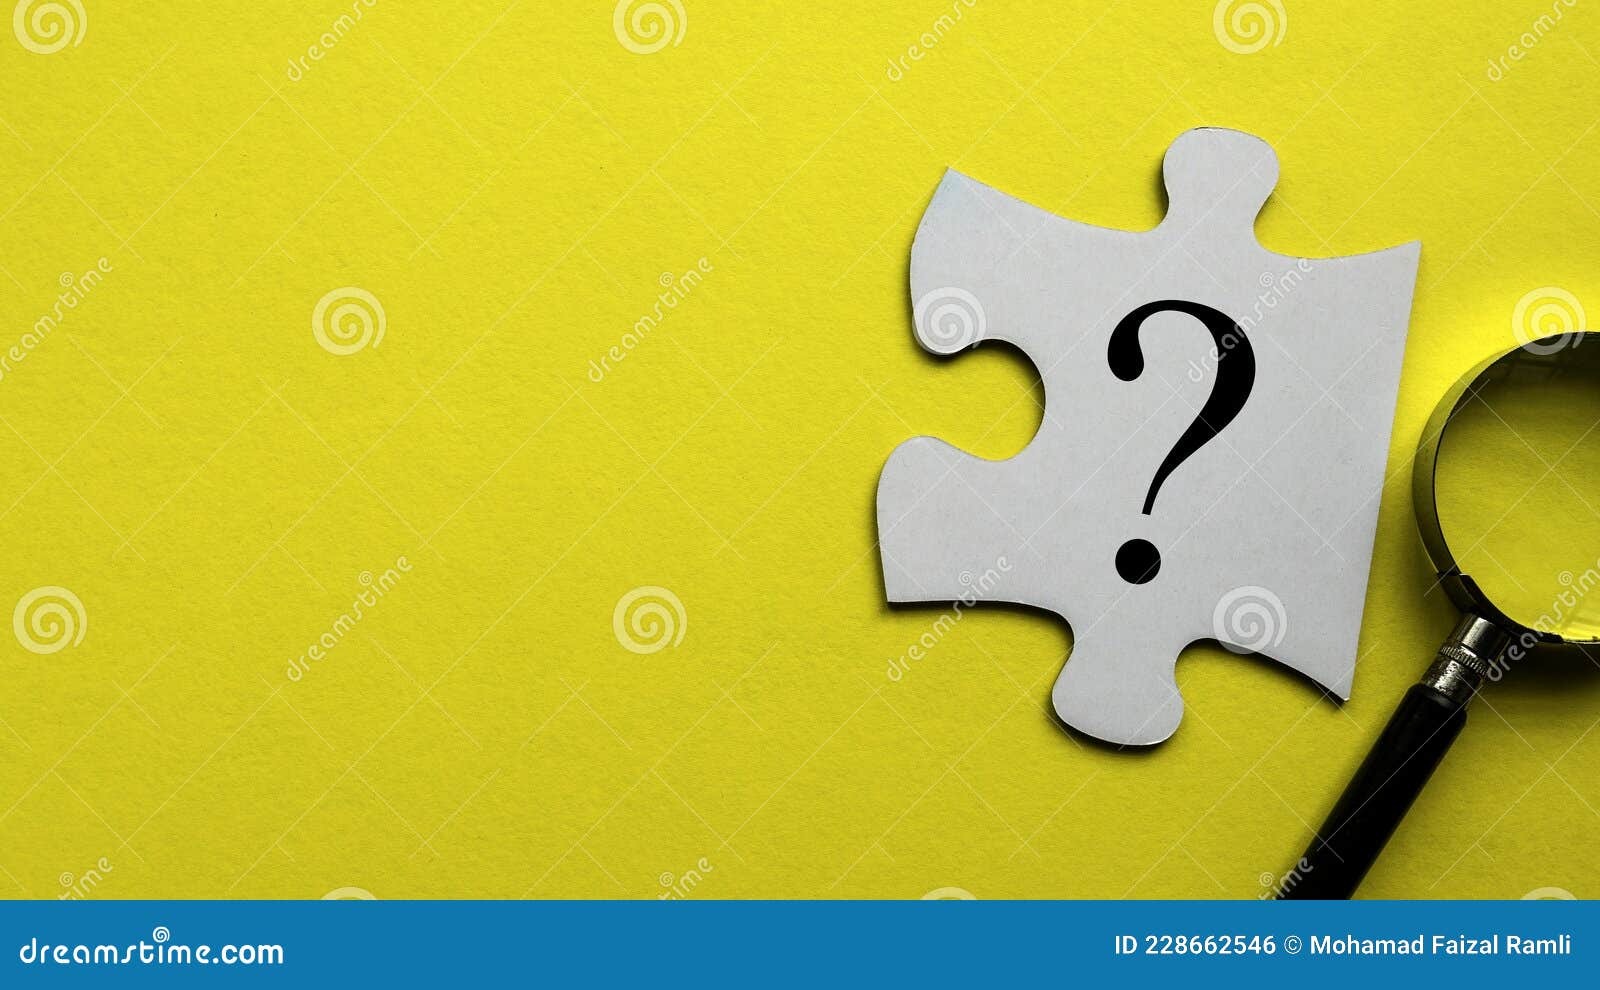 Questions Symbol on a White Piece of Jigsaw Puzzle on a Yellow ...